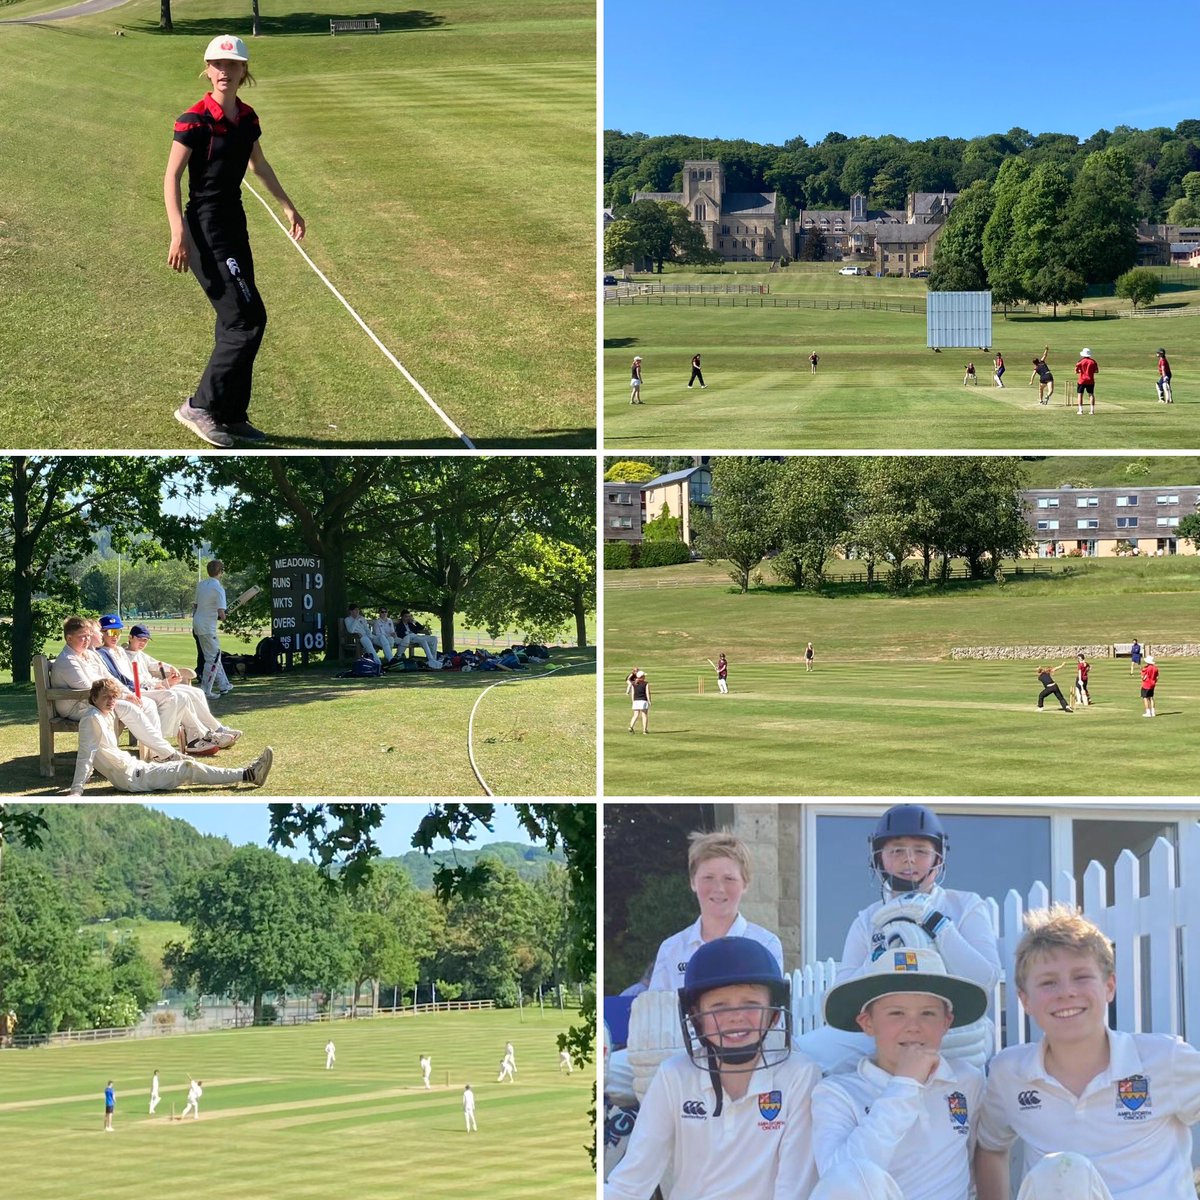 Runs aplenty this week. A maiden century for R. Storey and fifties for F. and O. Goor. Thank you to @TerringtonHall @RiponGrammarSch @ScarColl and @YarmSchool for fixtures so far this week. #AmpleCricket #SHACsport